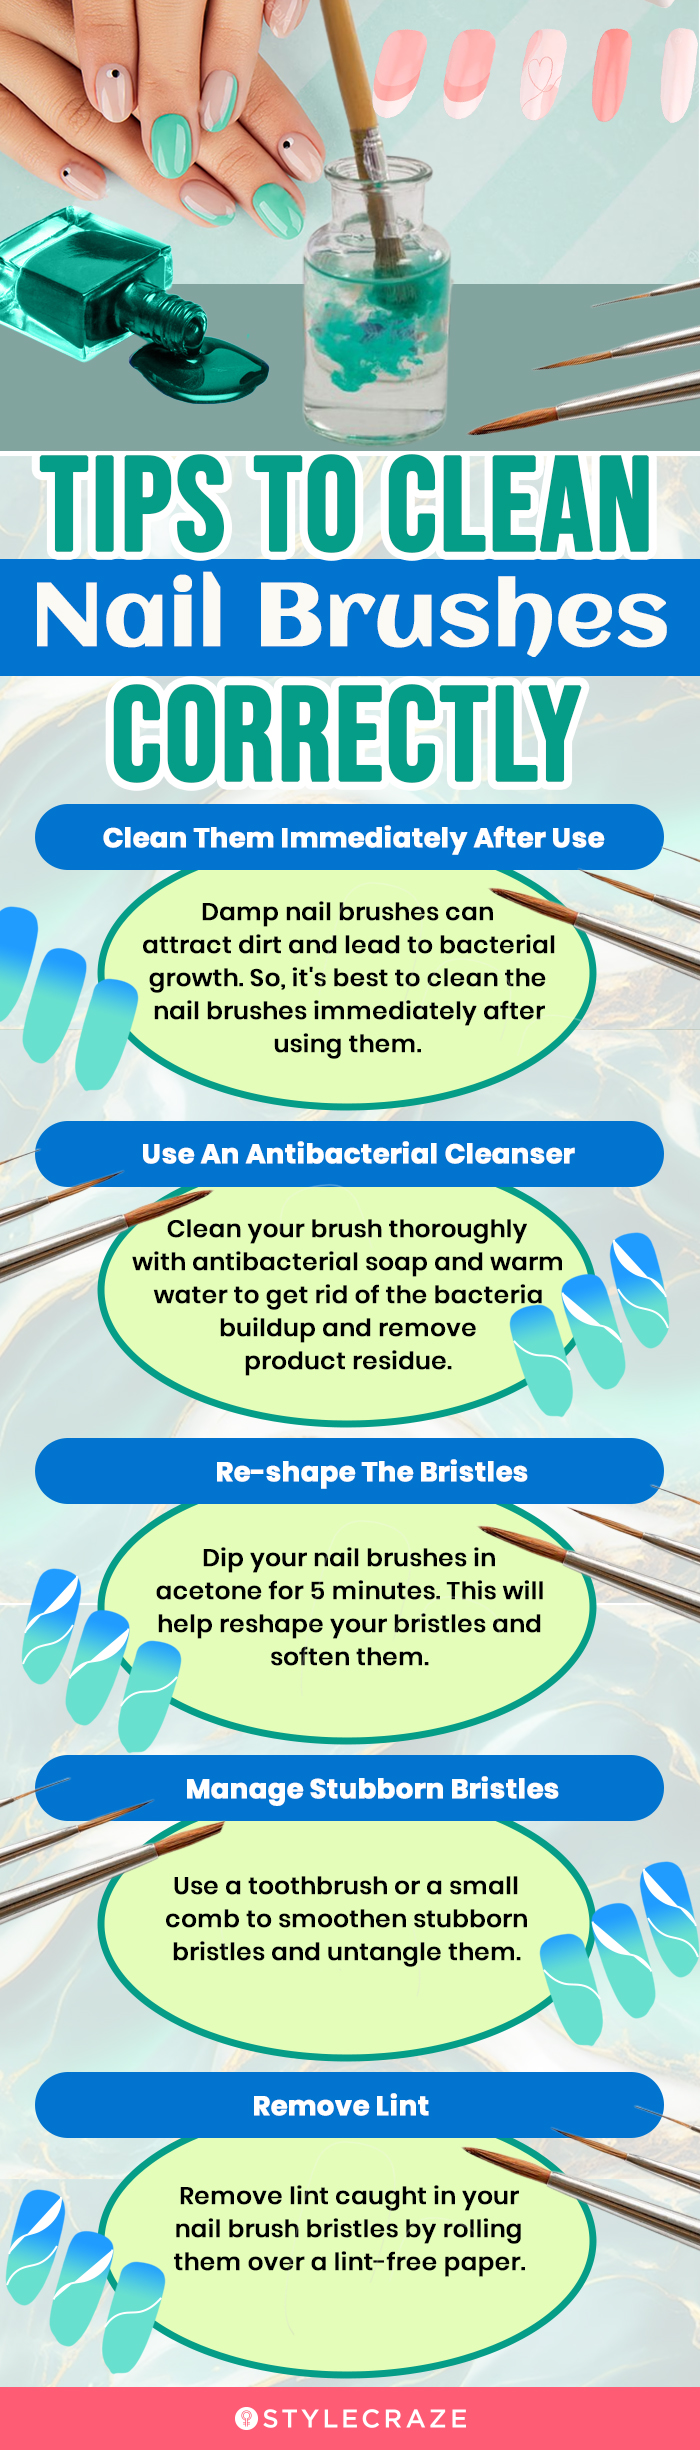 Tips To Clean Nail Brushes Effectively (infographic)